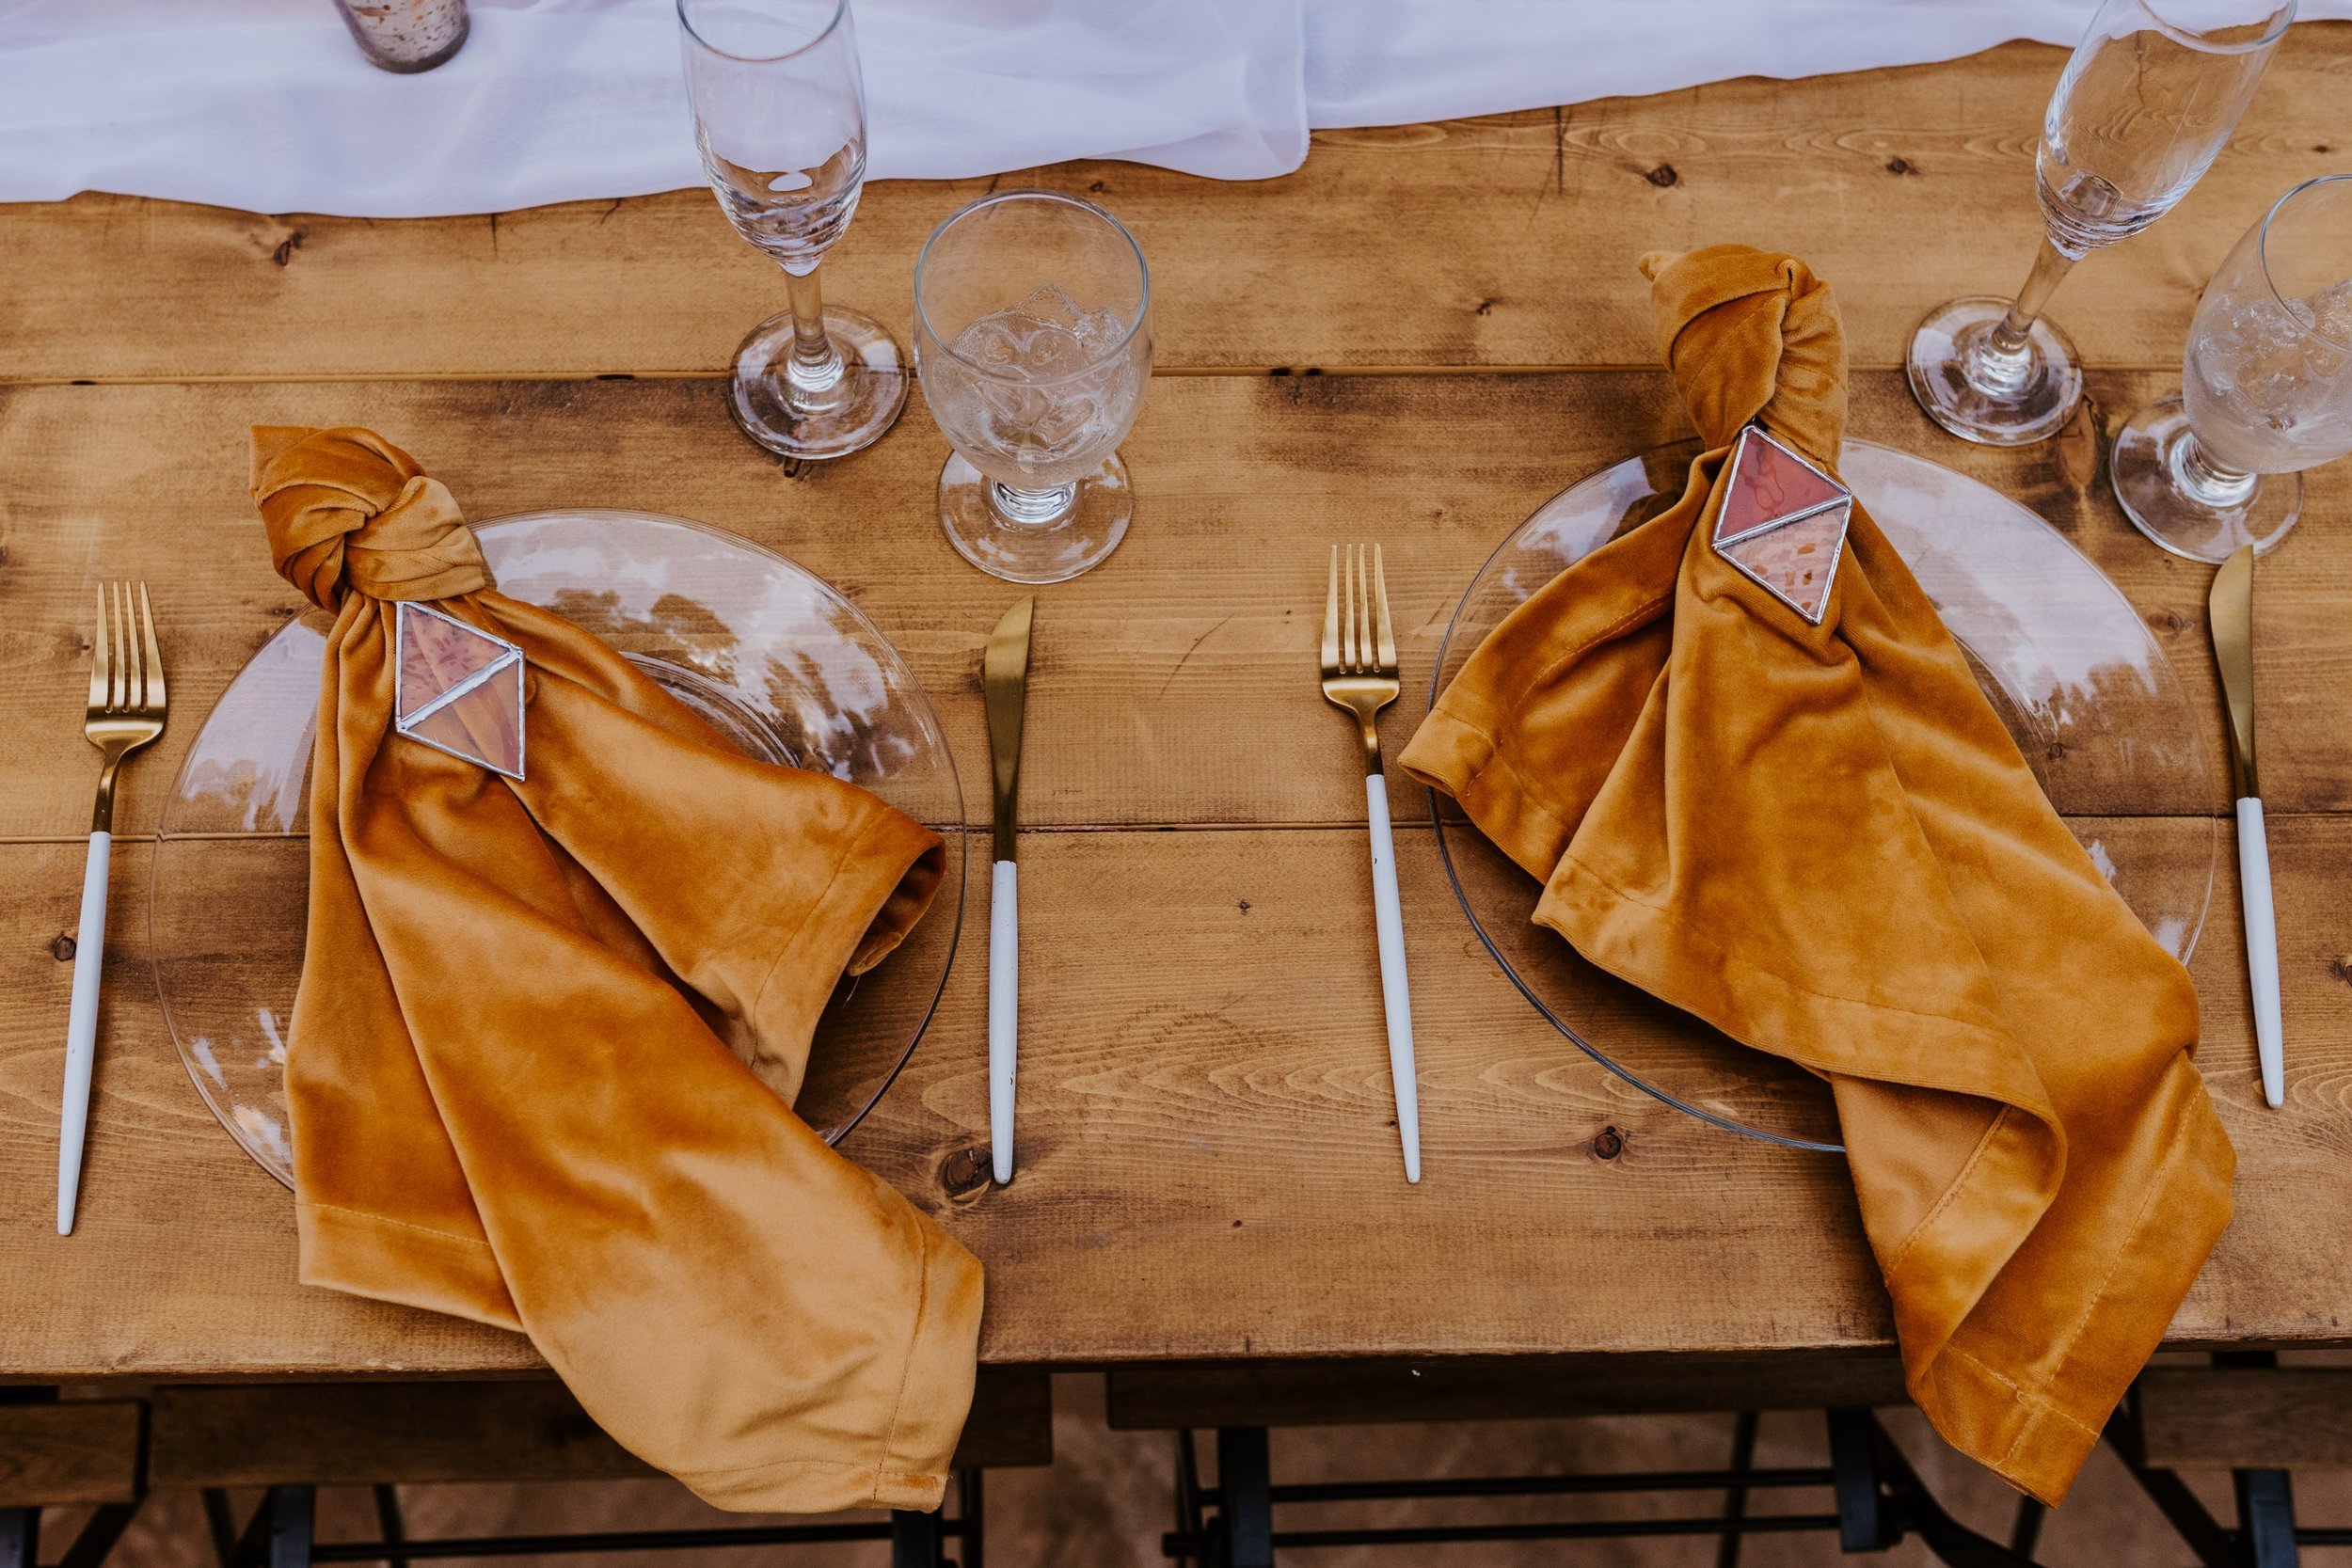 Enchanted forest castle wedding at Castle in the Forest in Lake Arrowhead, magical castle airbnb wedding, mustard velvet napkins with stained glass napkin rings, photography by Tida Svy